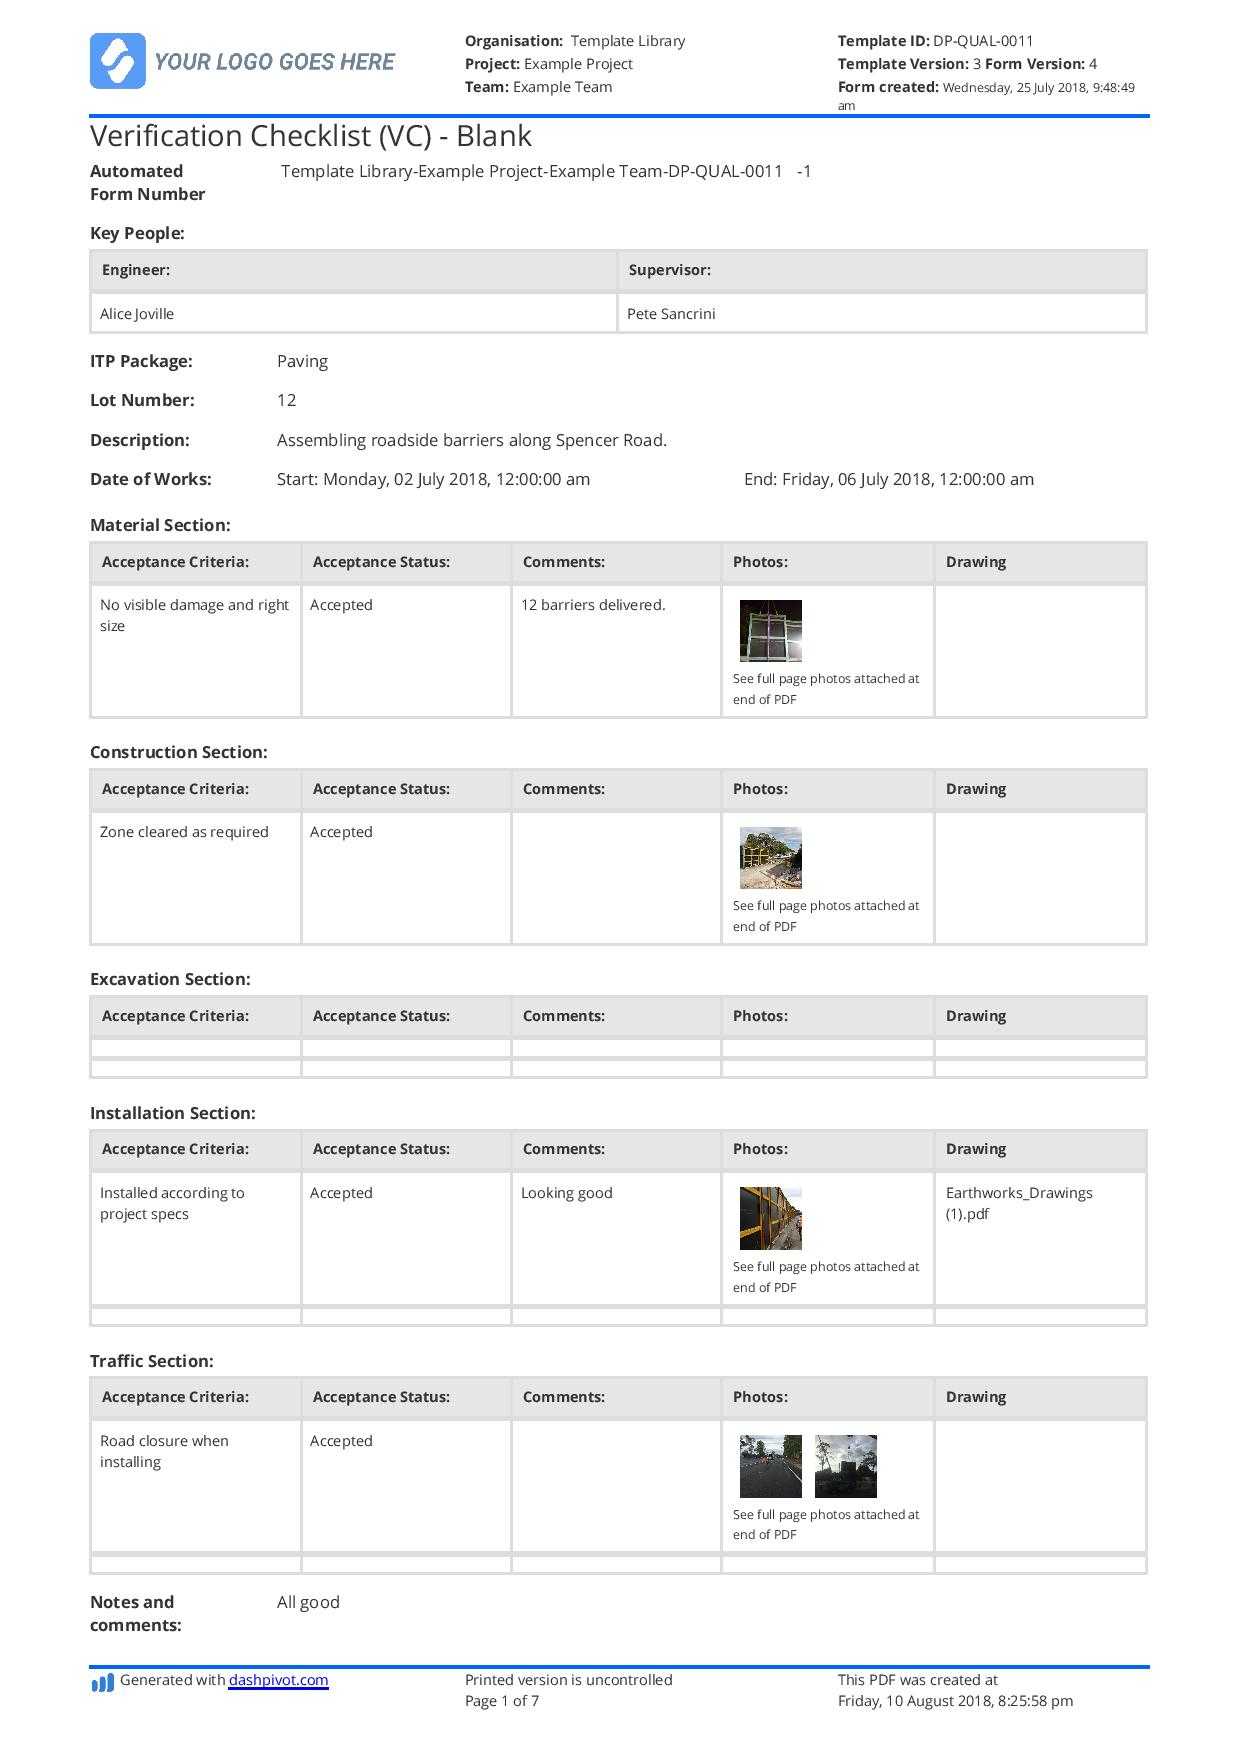 Verification Checklist Blank Template: Use This Vc Checklist Within Blank Checklist Template Pdf